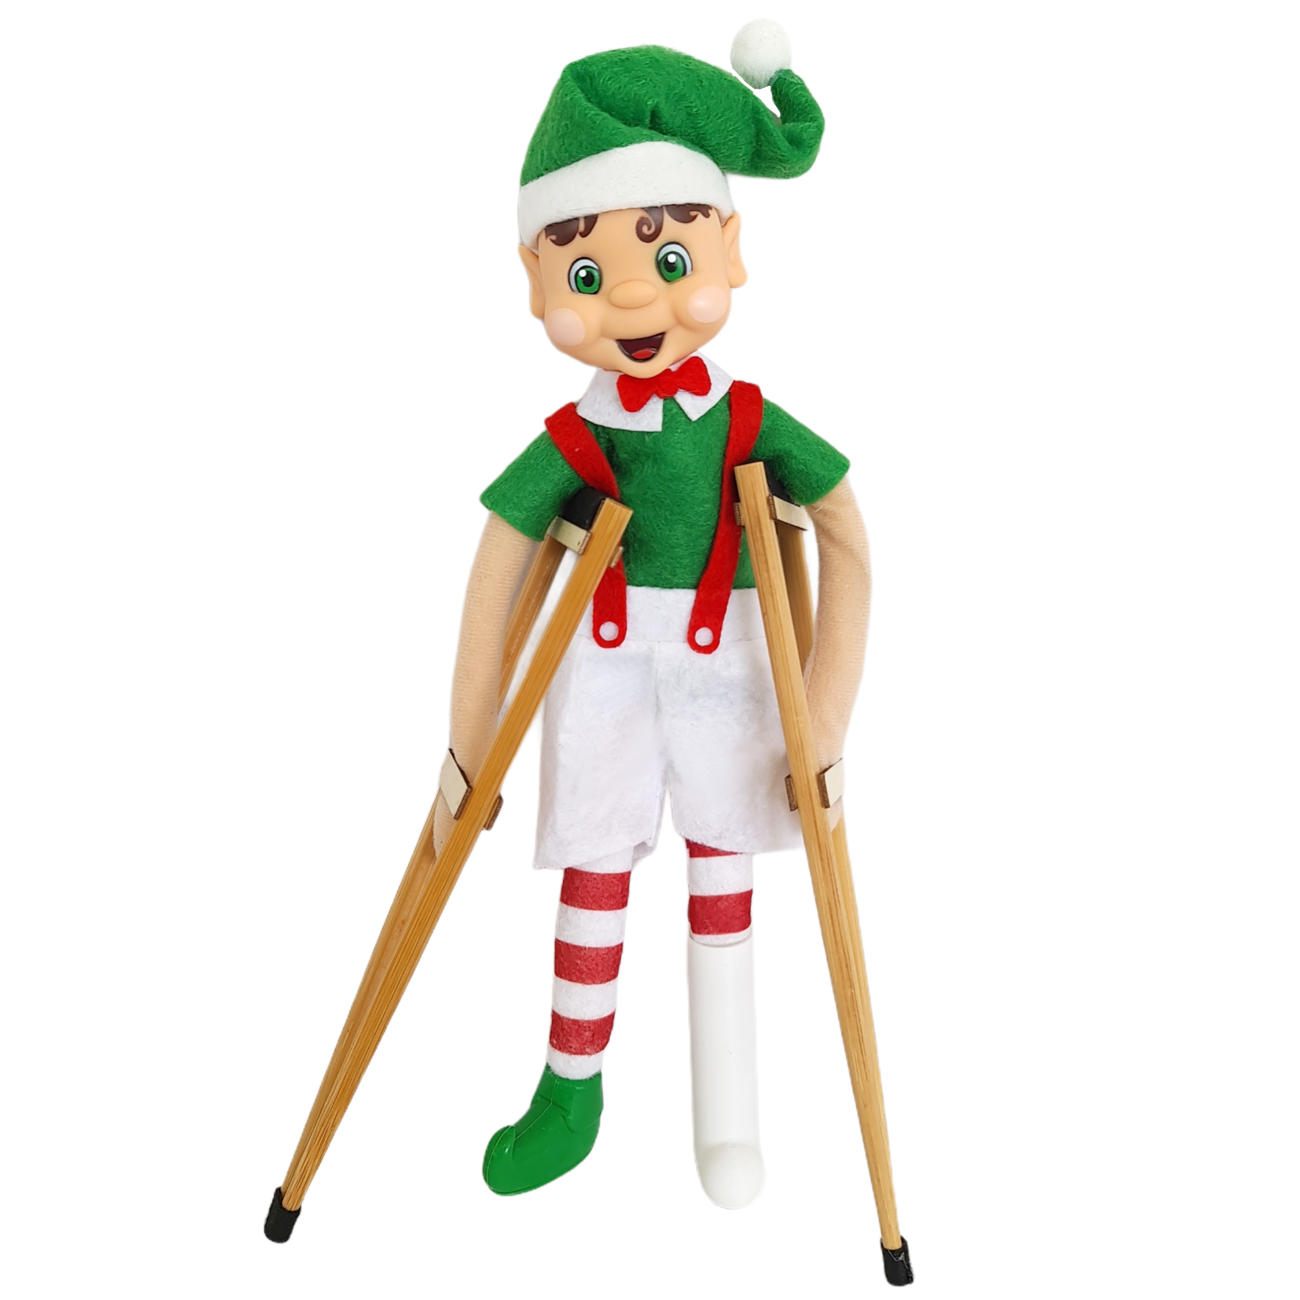 Elf holding crutches prop with a broken foot